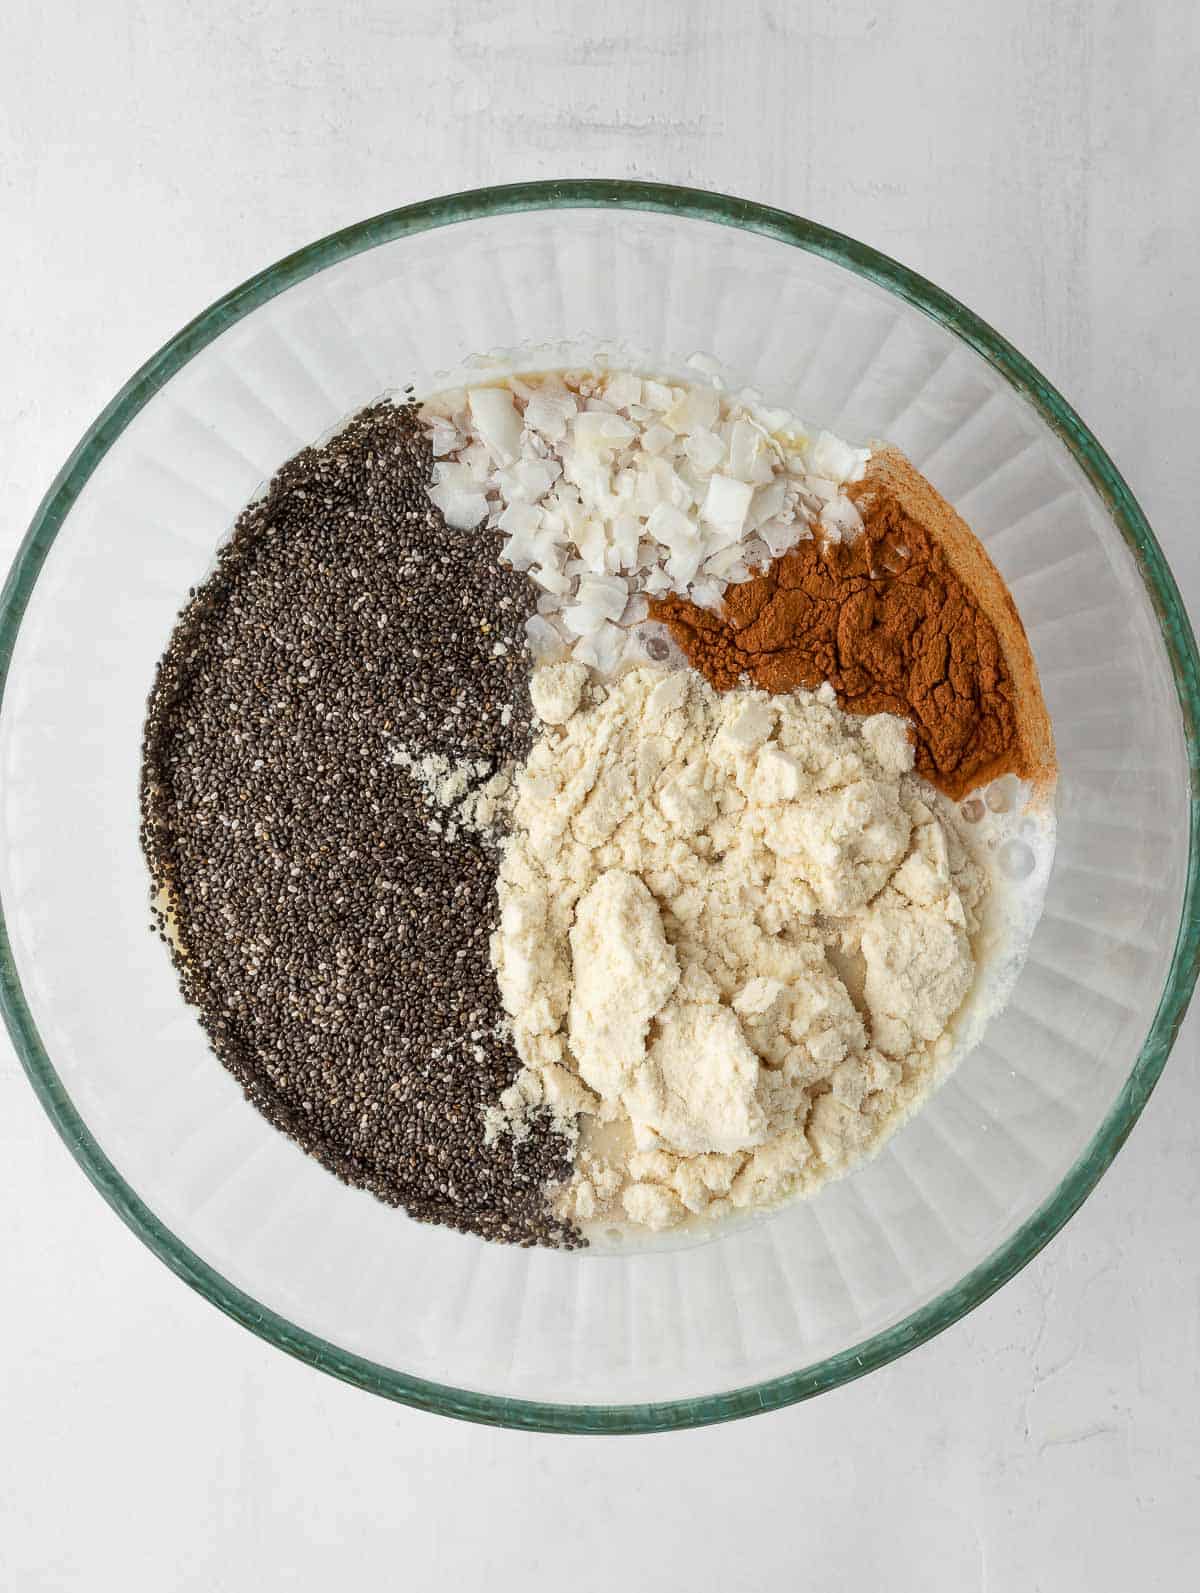 all the ingredients of the protein chia pudding in a bowl